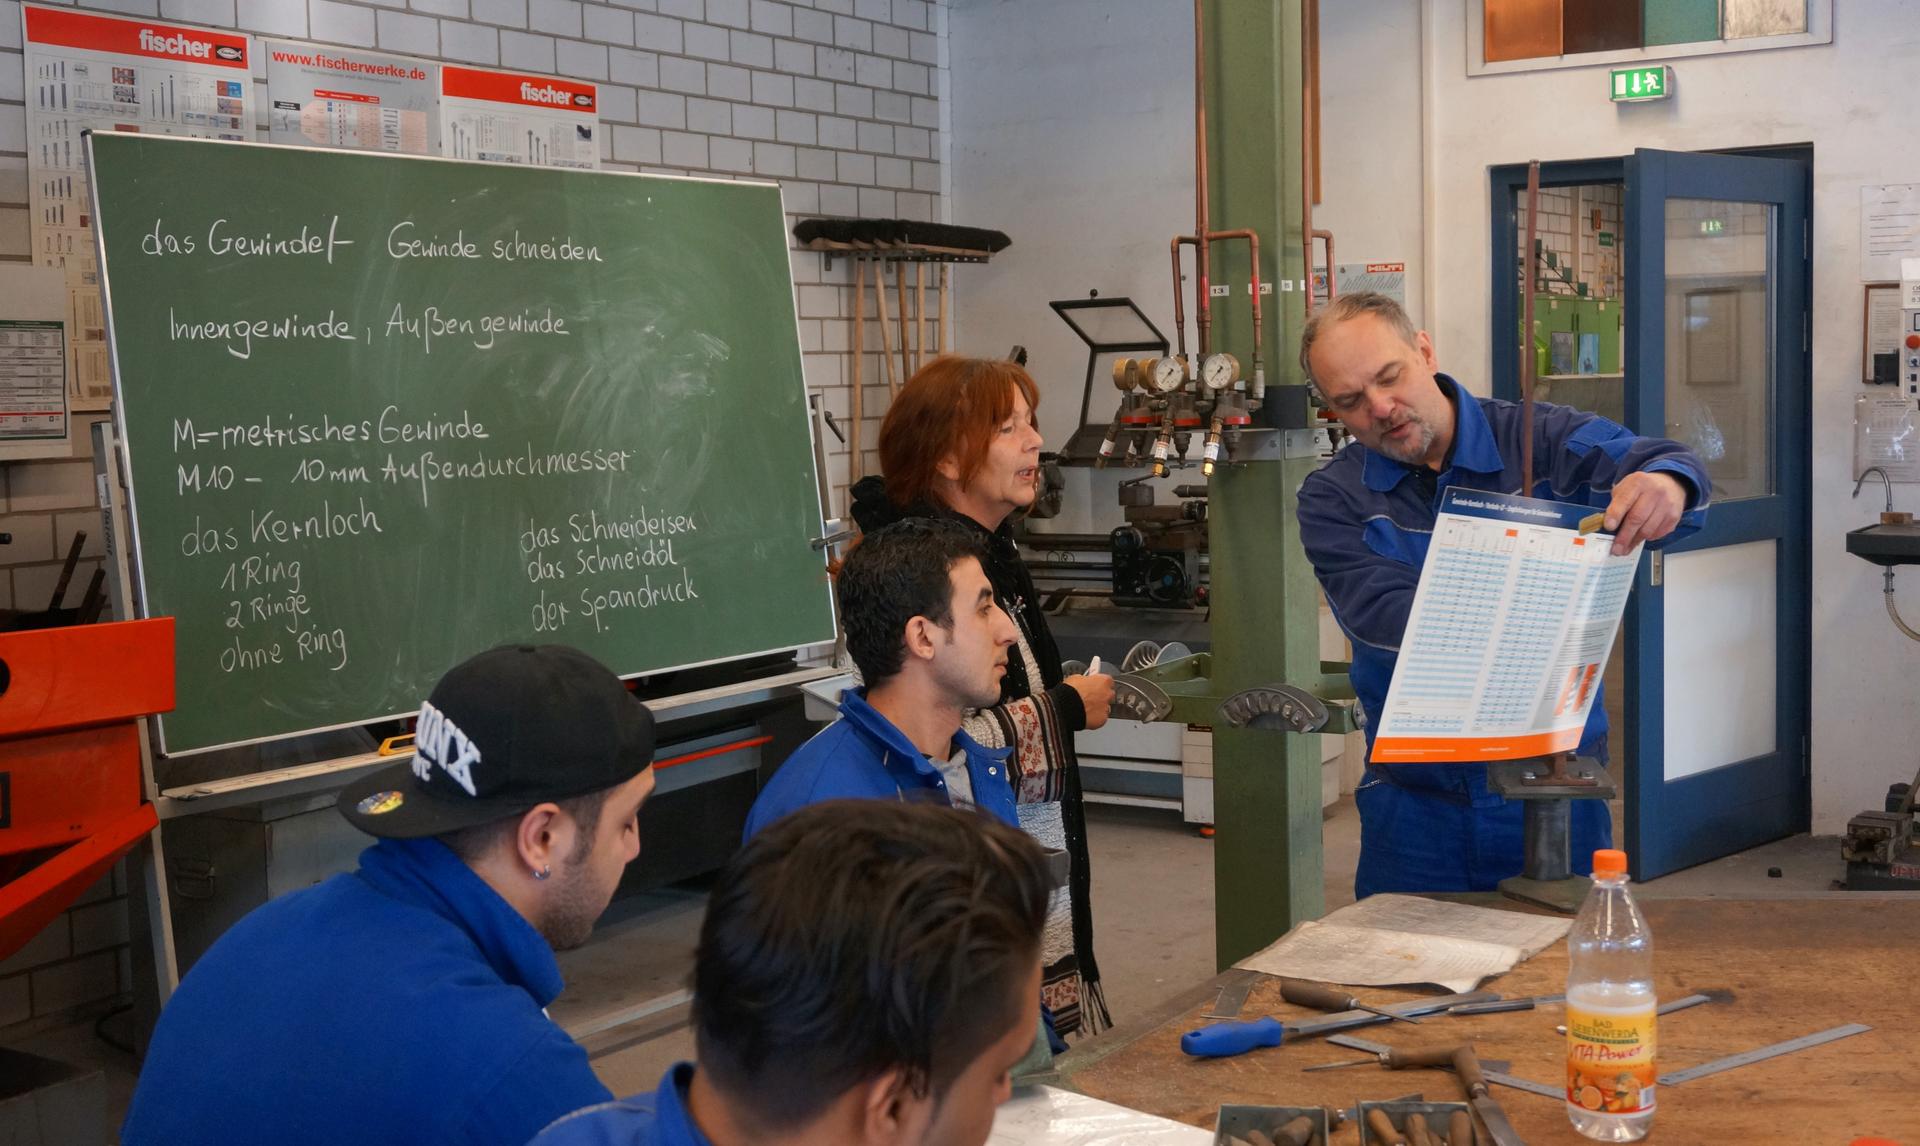 Instructor Gerald Beyer discusses the day's assignment with the class German instructor. As Bayer gives the day's lesson in metalwork, relevant vocabulary is written on the chalkboard. It's a crucial step in getting the refugee participants' language up t